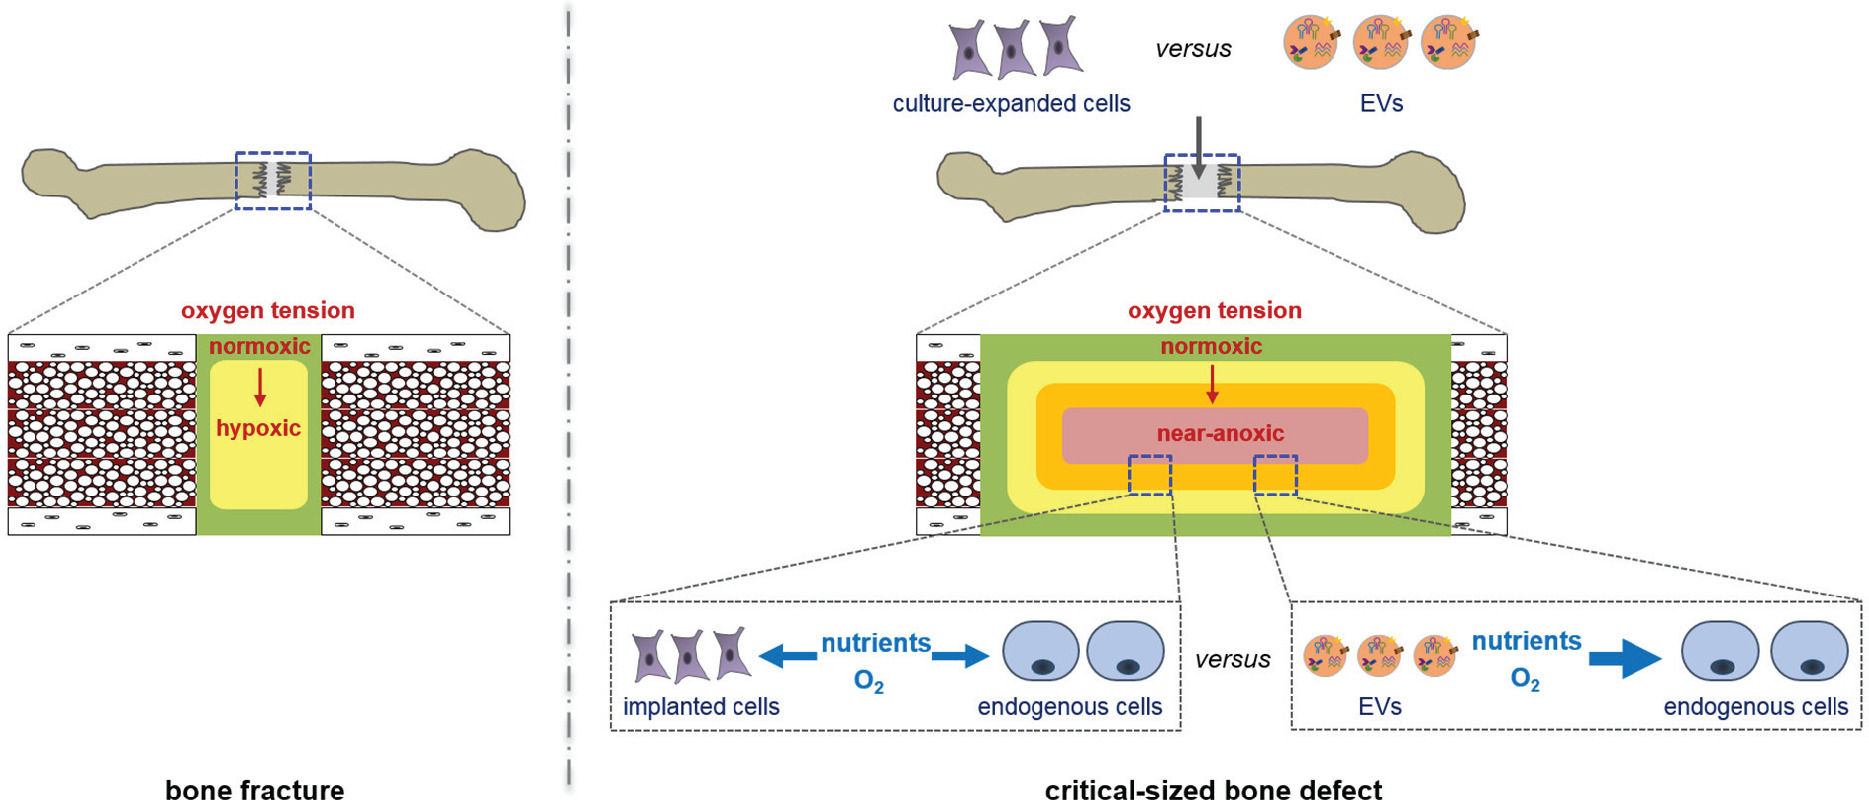 Fig. 3 
          Diagram showing the potential advantage of extracellular vesicles (EVs) within a large bone defect microenvironment. As opposed to simple fractures, bone defects beyond a critical size are characterized by severe nutrient deficiency and near-anoxia within their core. While exogenous cells implanted into these defects may secrete pro-regenerative factors, they also compete with endogenous repair cells migrating into the defect for scarce oxygen and nutrients. In contrast, the same pro-regenerative signals packaged within EVs would not necessarily tax the defect for nutrients and oxygen, potentially permitting enhanced repair by endogenous cells.
        